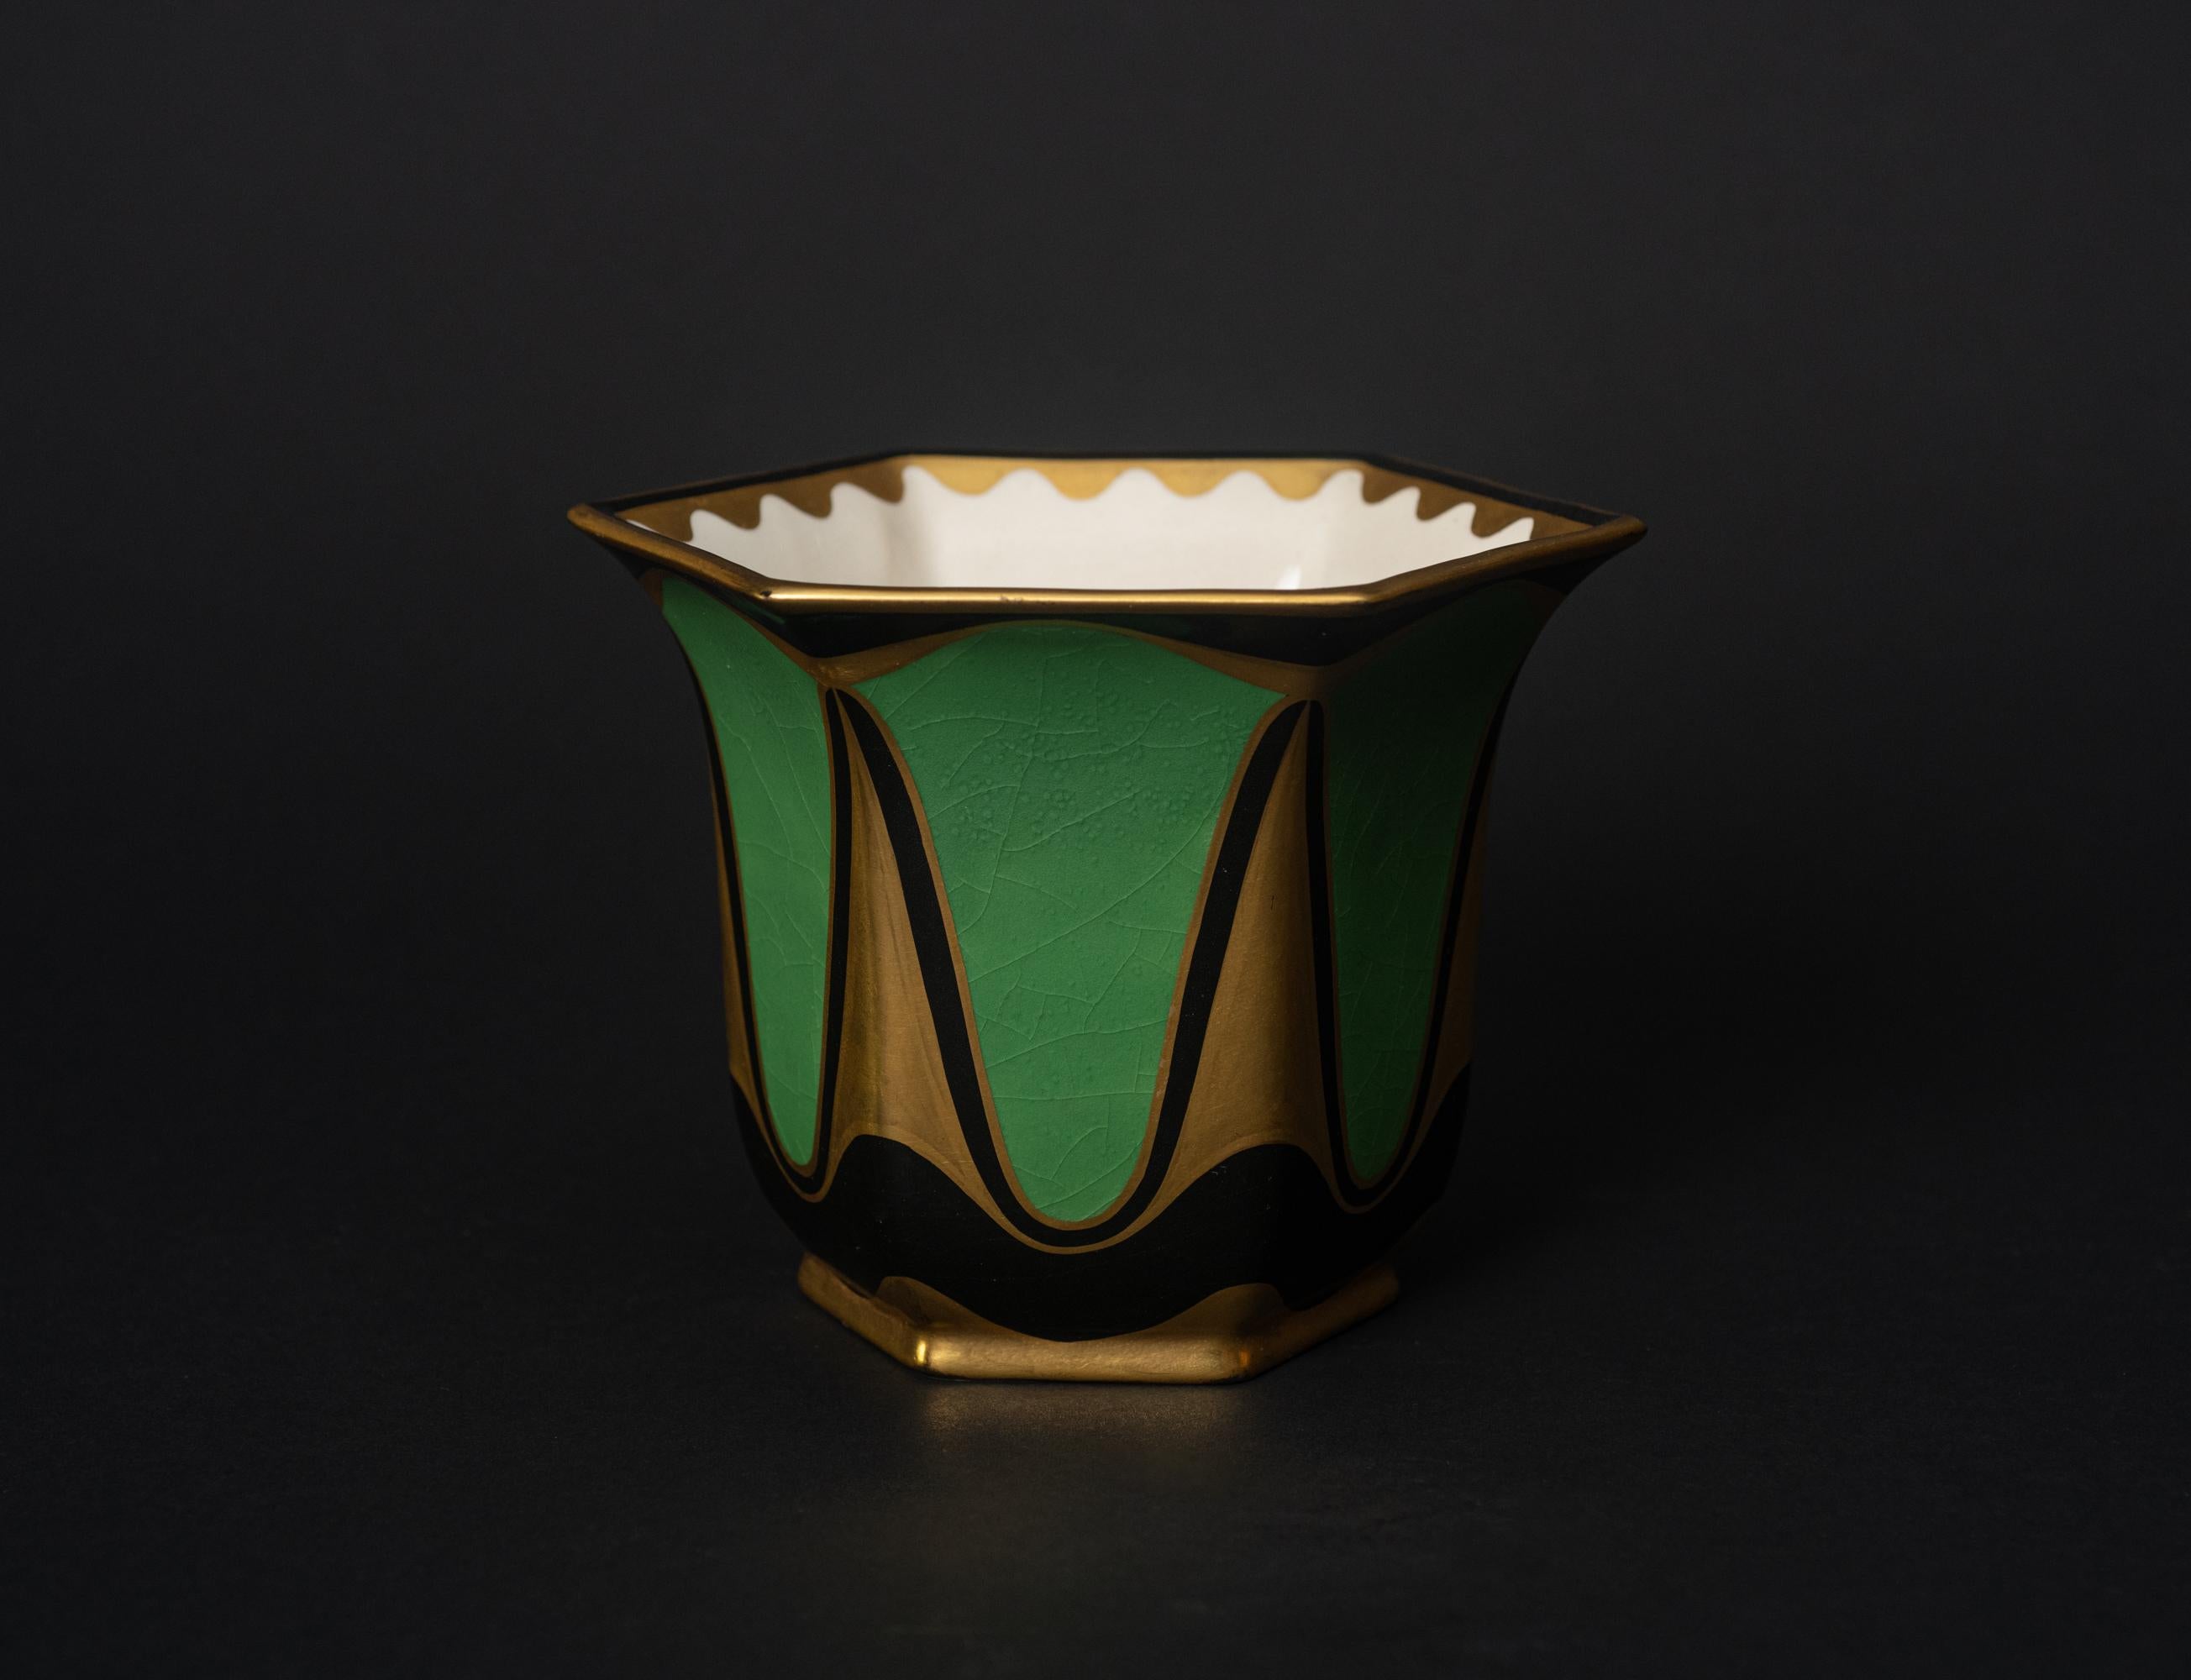 Secessionist Porcelain Lidded Box by KARL KLAUS (1889-1925) for SERAPIS WAHLISS, Vienna, c. 1911, hand-painted in gold and black enamels in a stylized geometric diamond and holly motif, the bell-shaped domed lid terminating in a cylindrical finial